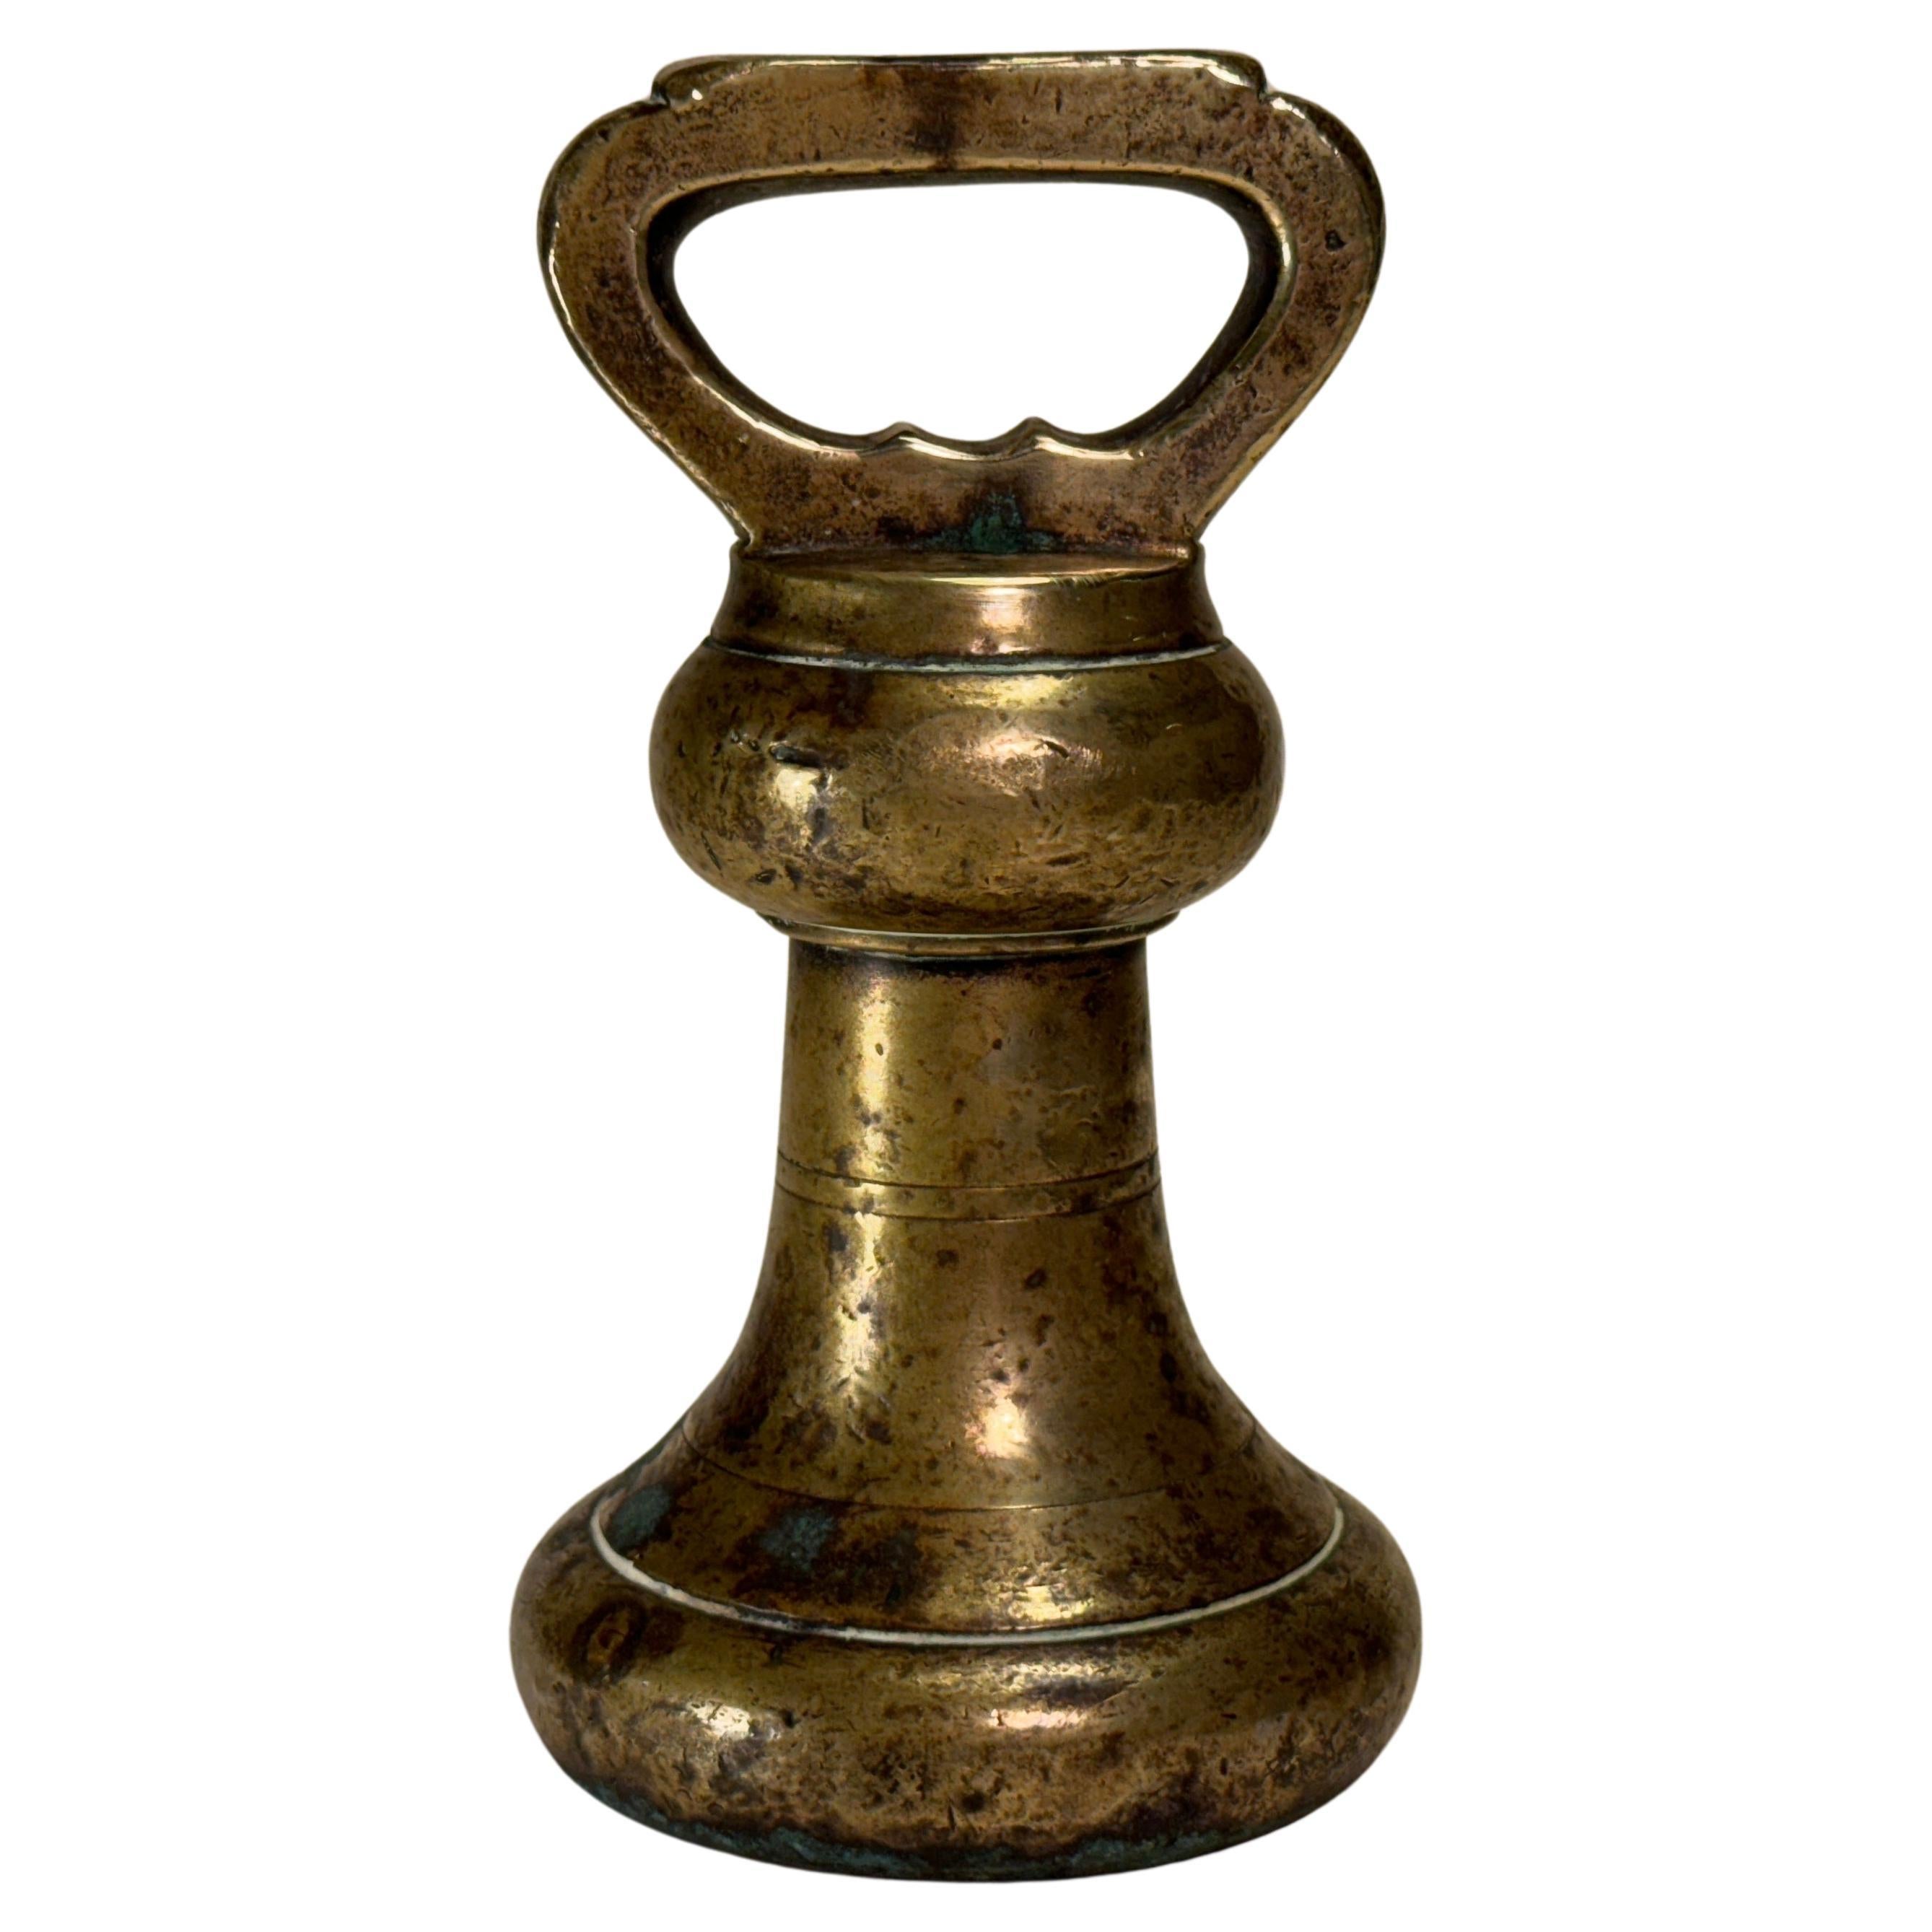 Large Antique Bronze Letter bell weight or dumbell 1 lbs.

